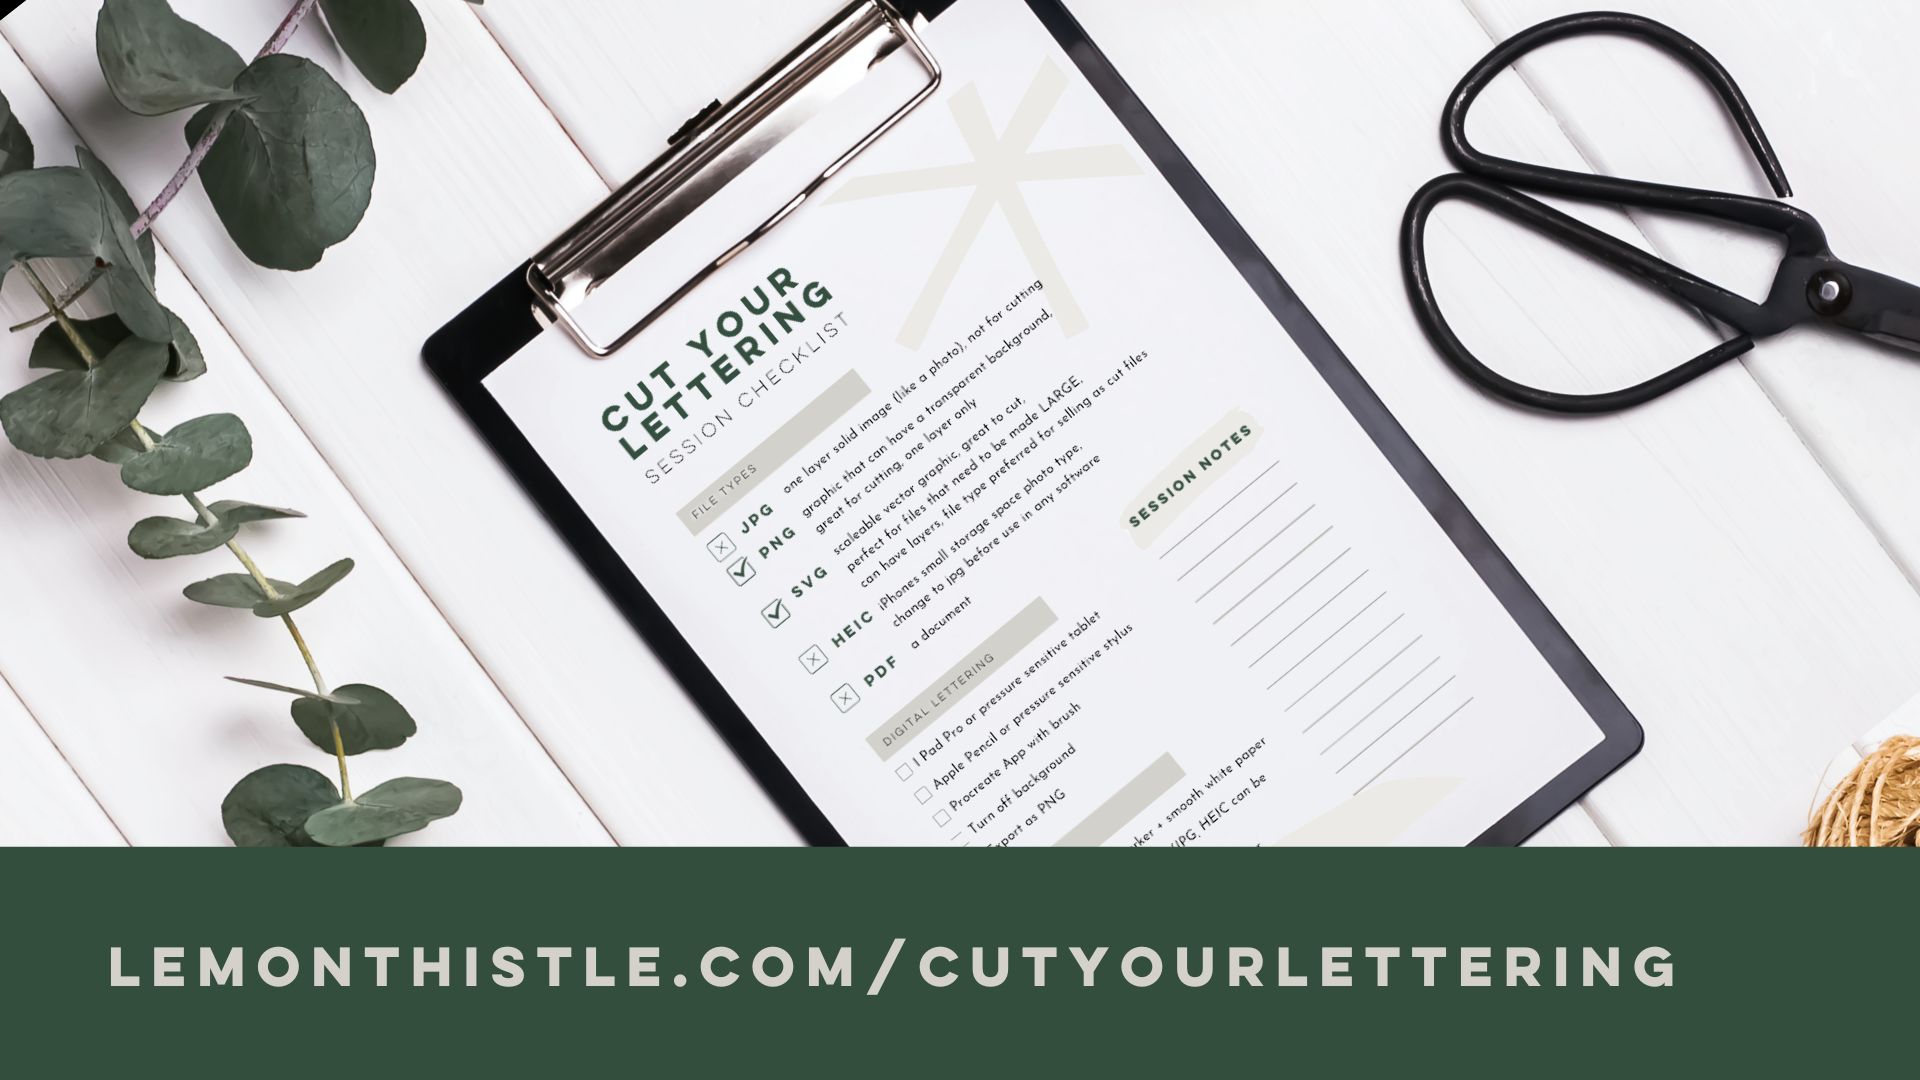 Cut your lettering free checklist